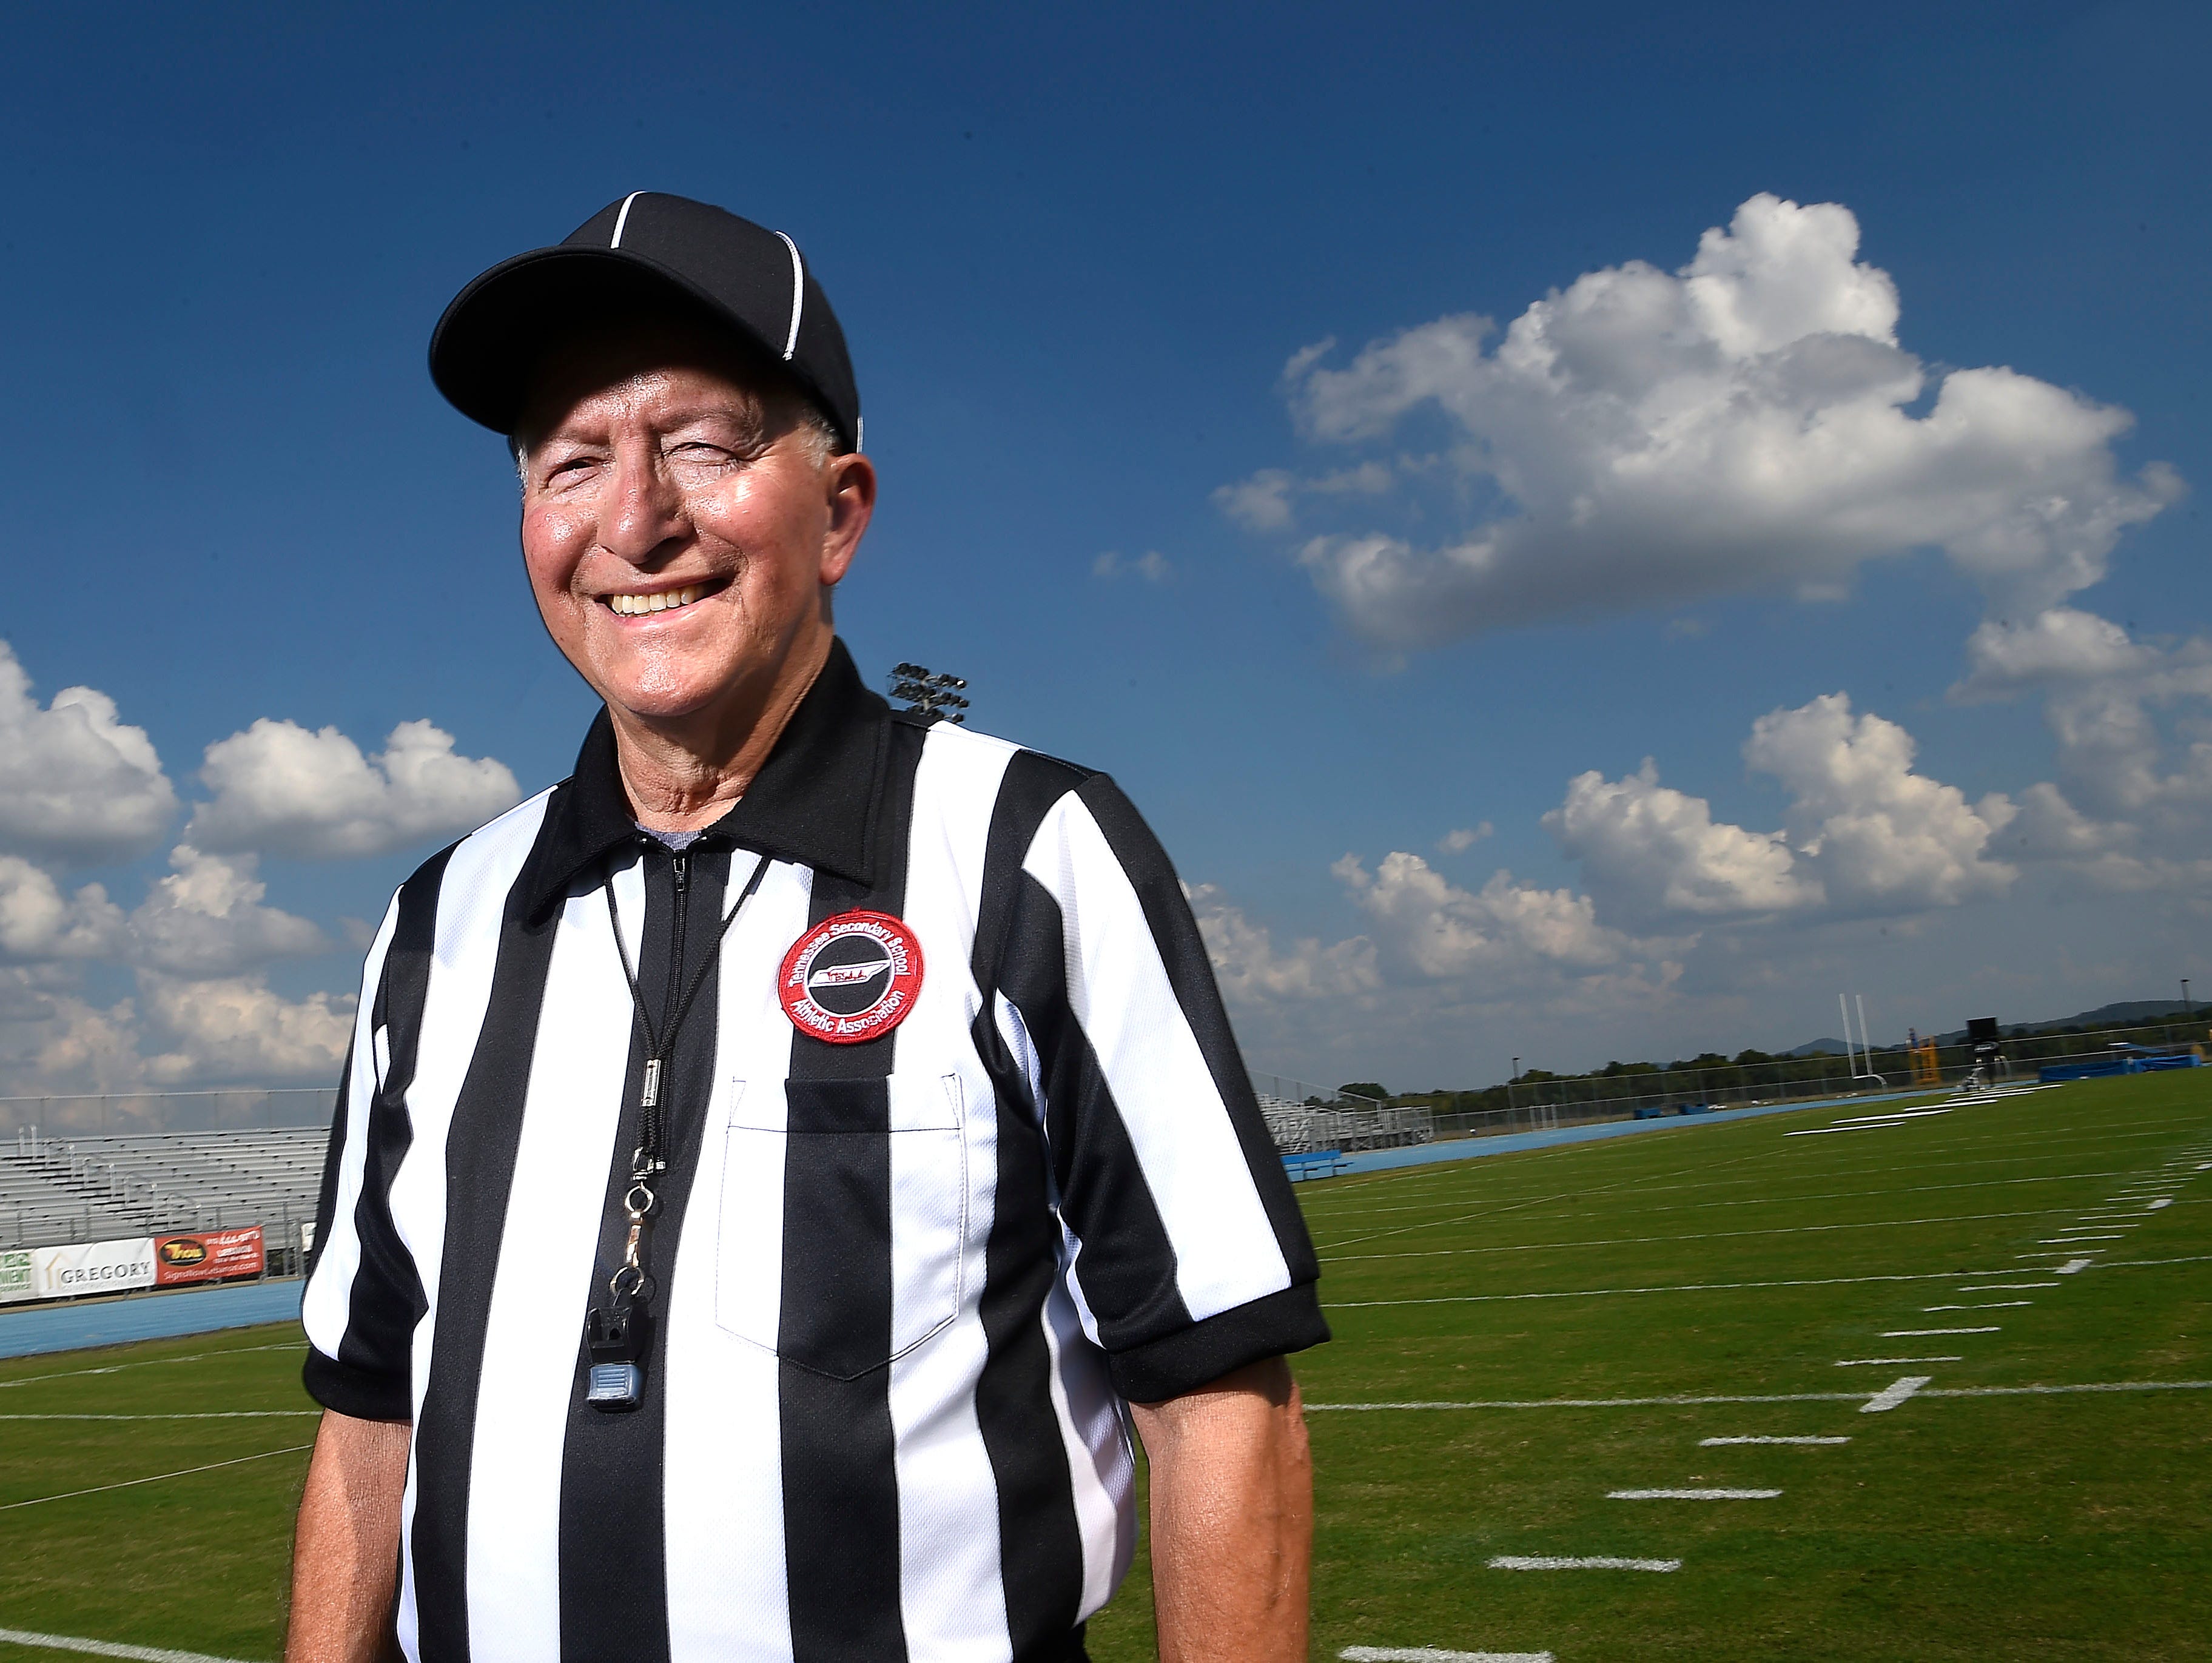 Bob Pack has been officiating on Friday nights at high school games for 48 years.